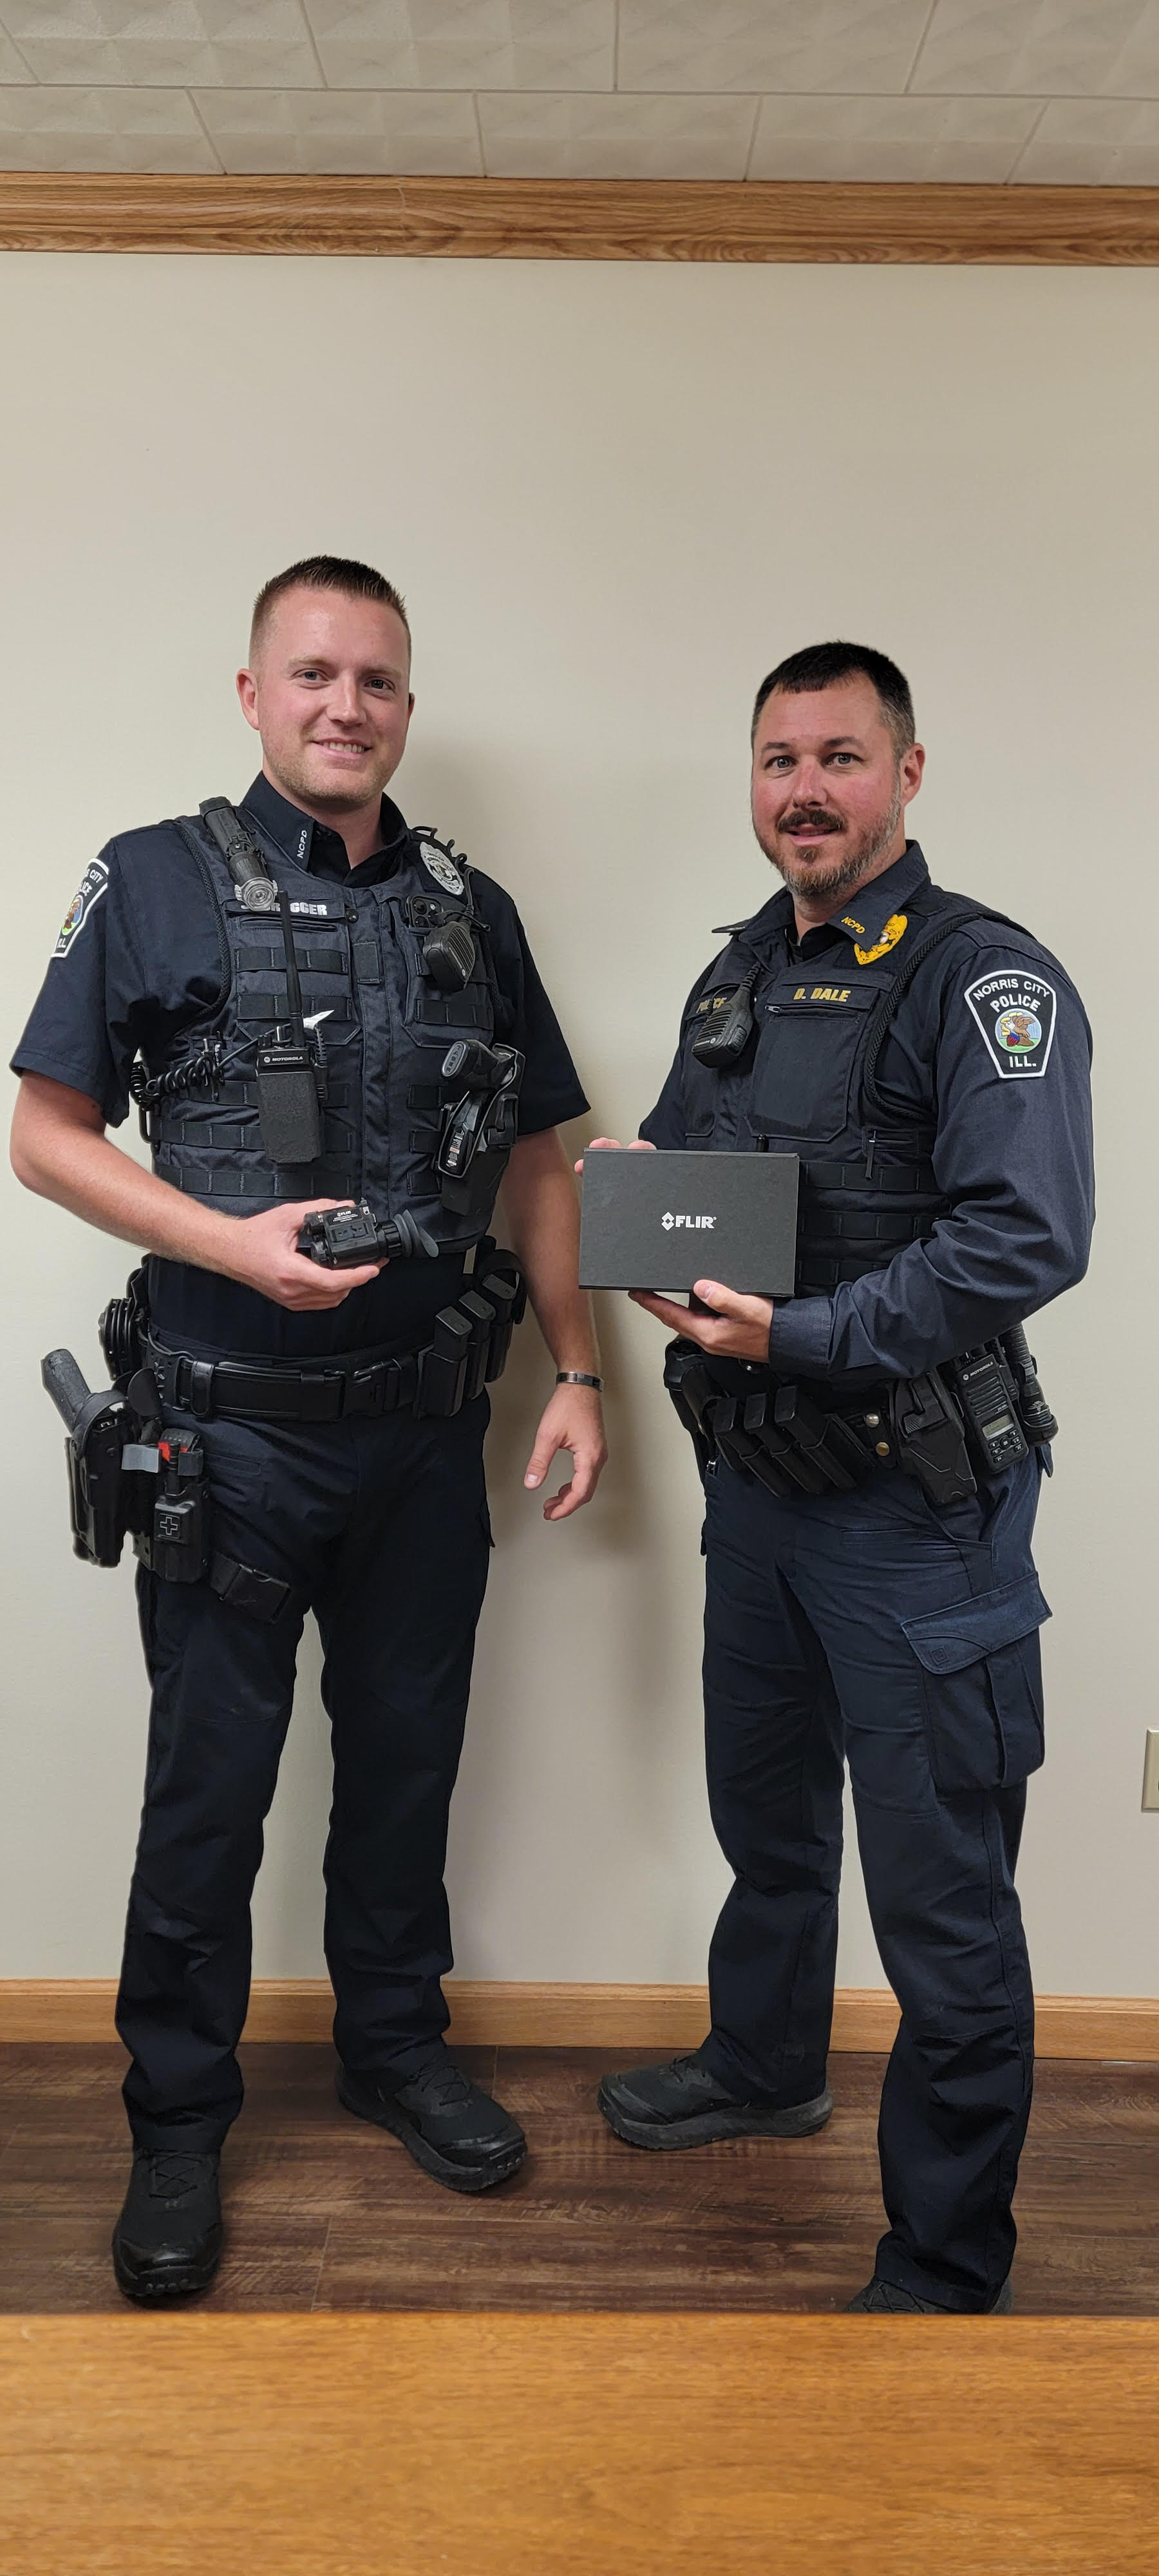 The Norris City Police Department recently received a generous donation of a FLIR (forward looking infrared) device from the United States Deputy Sheriff’s Association.  The handheld thermal imaging tool will aid officers in navigating low-light situation